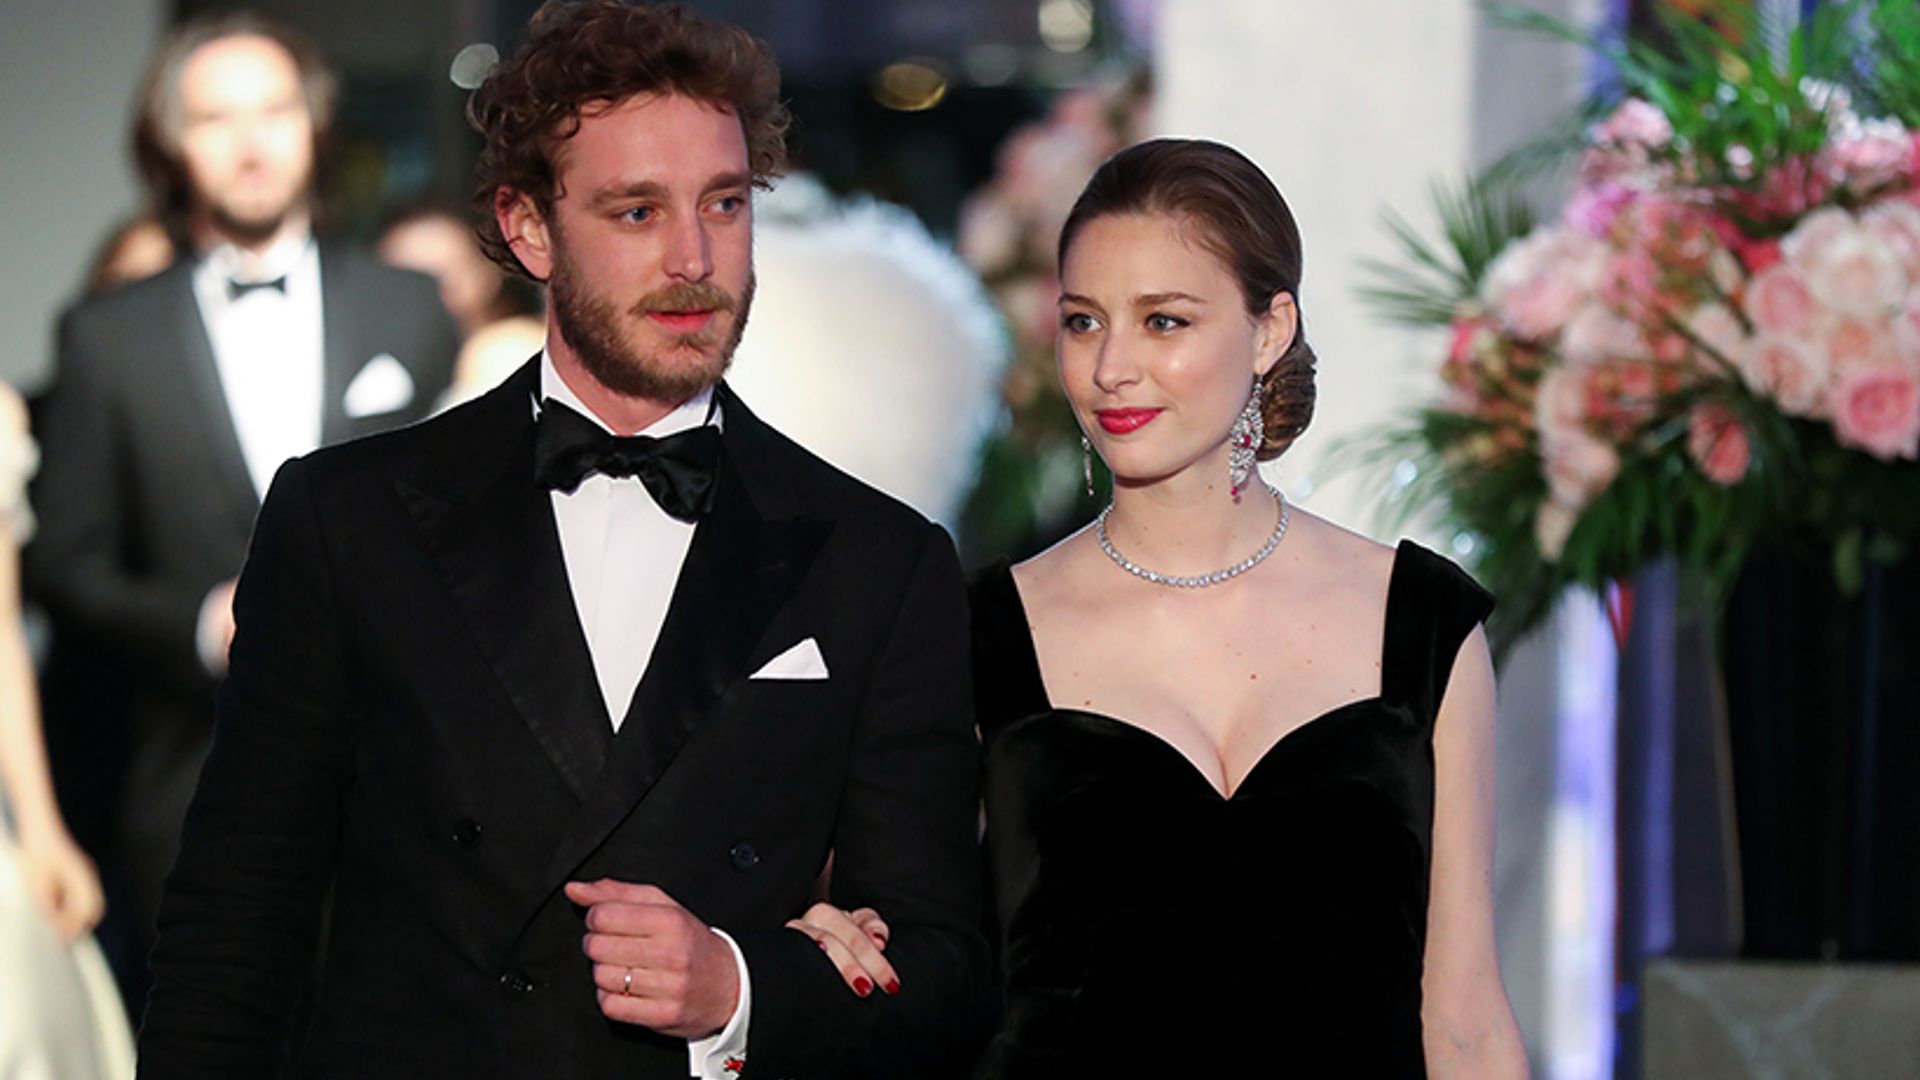 Pierre Casiraghi and Beatrice Borromeo welcome second baby – find out the name!